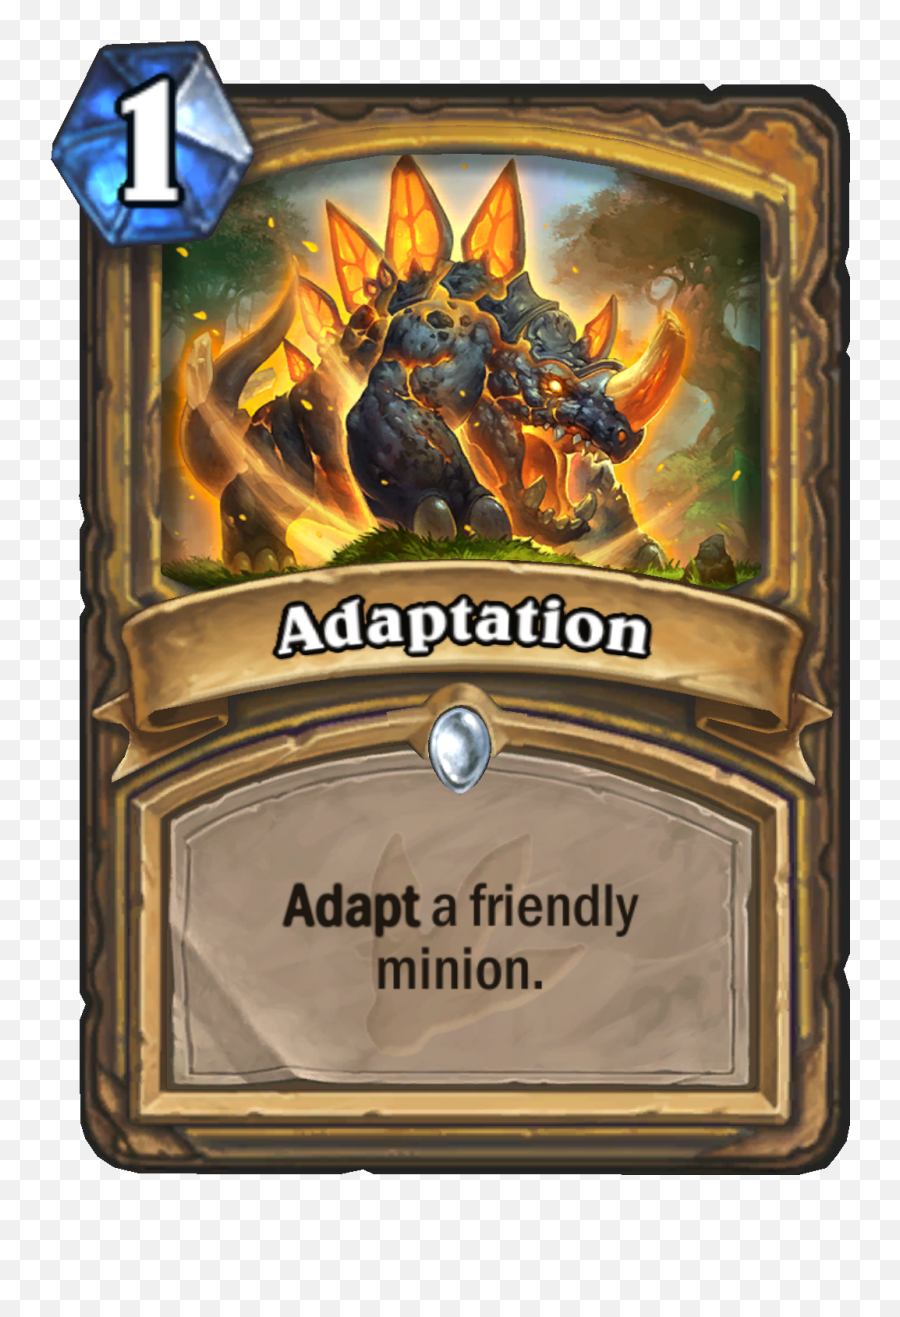 Png Image For Designing Purpose - Un Goro Cards Hearthstone,Hearthstone Png